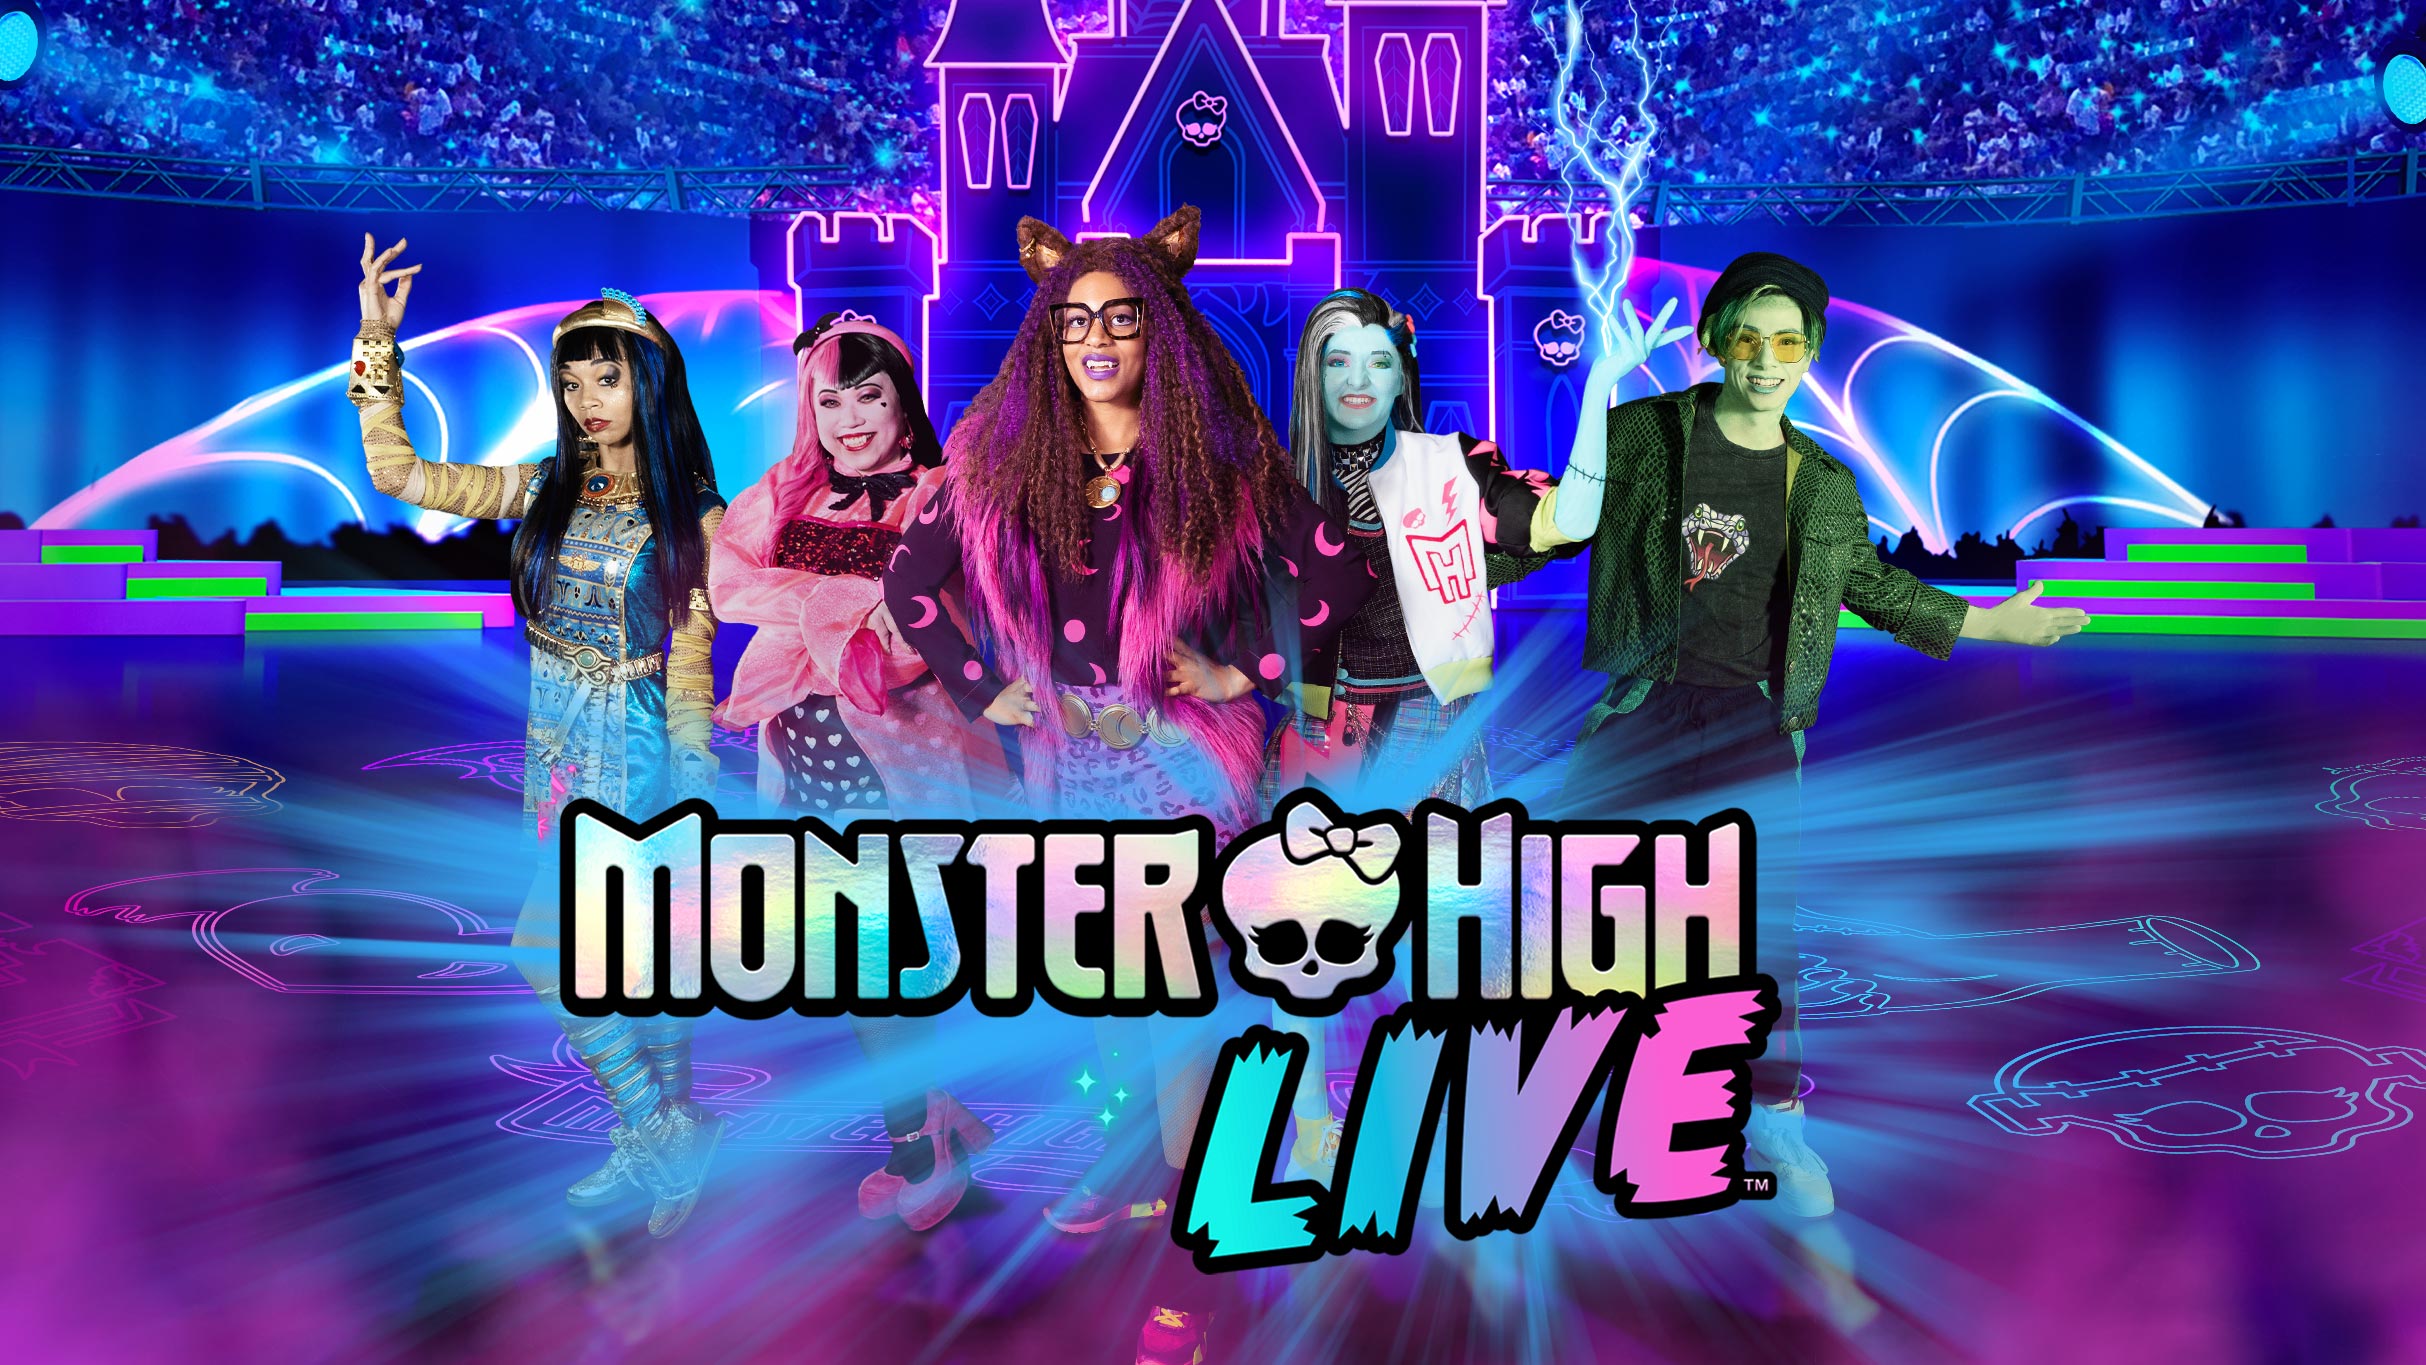 Monster High Live in Hoffman Estates promo photo for Exclusive presale offer code